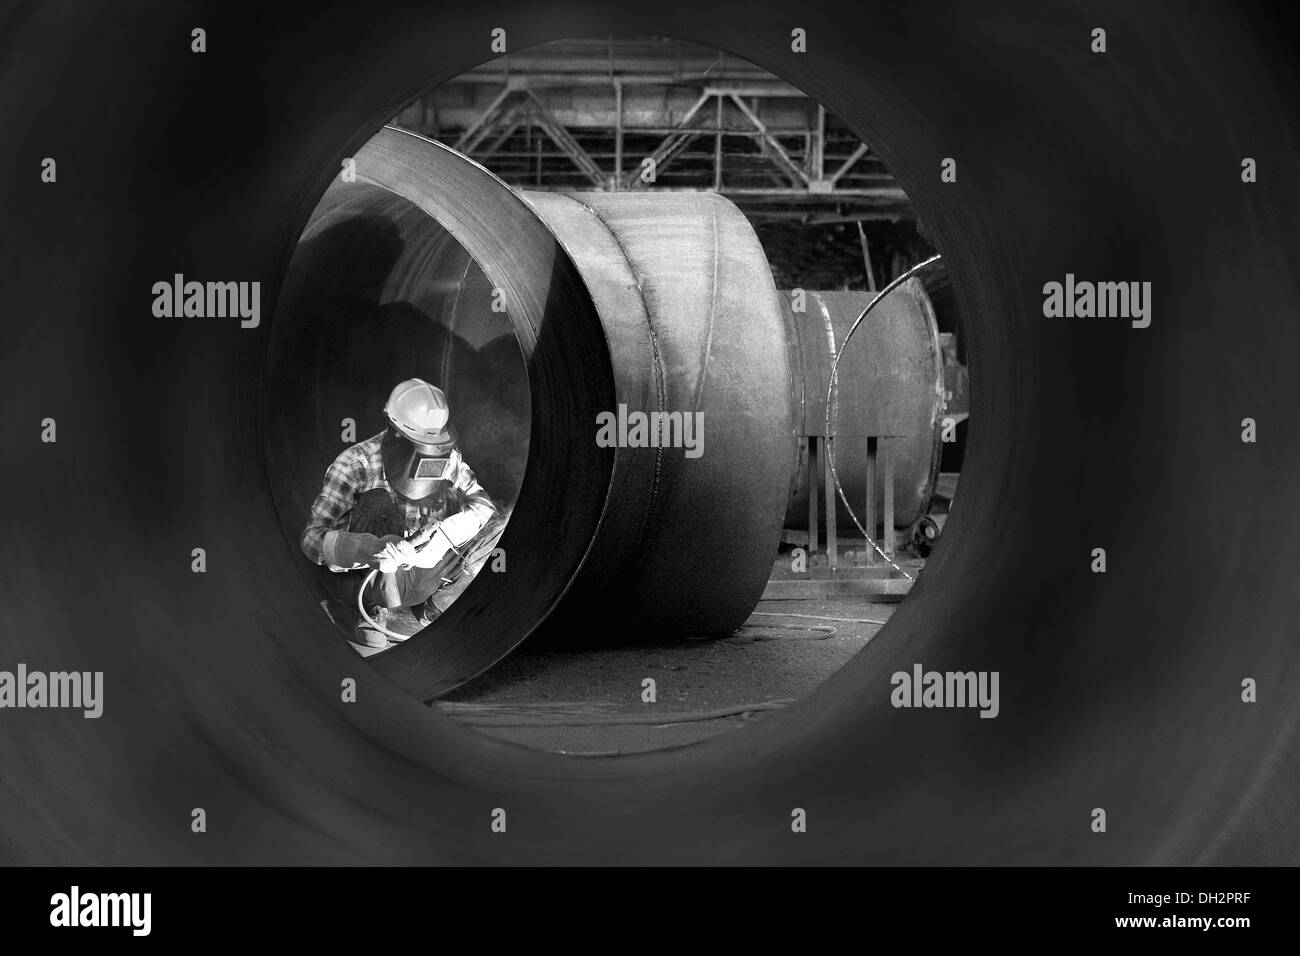 Factory worker man welding pipe with safety mask Stock Photo